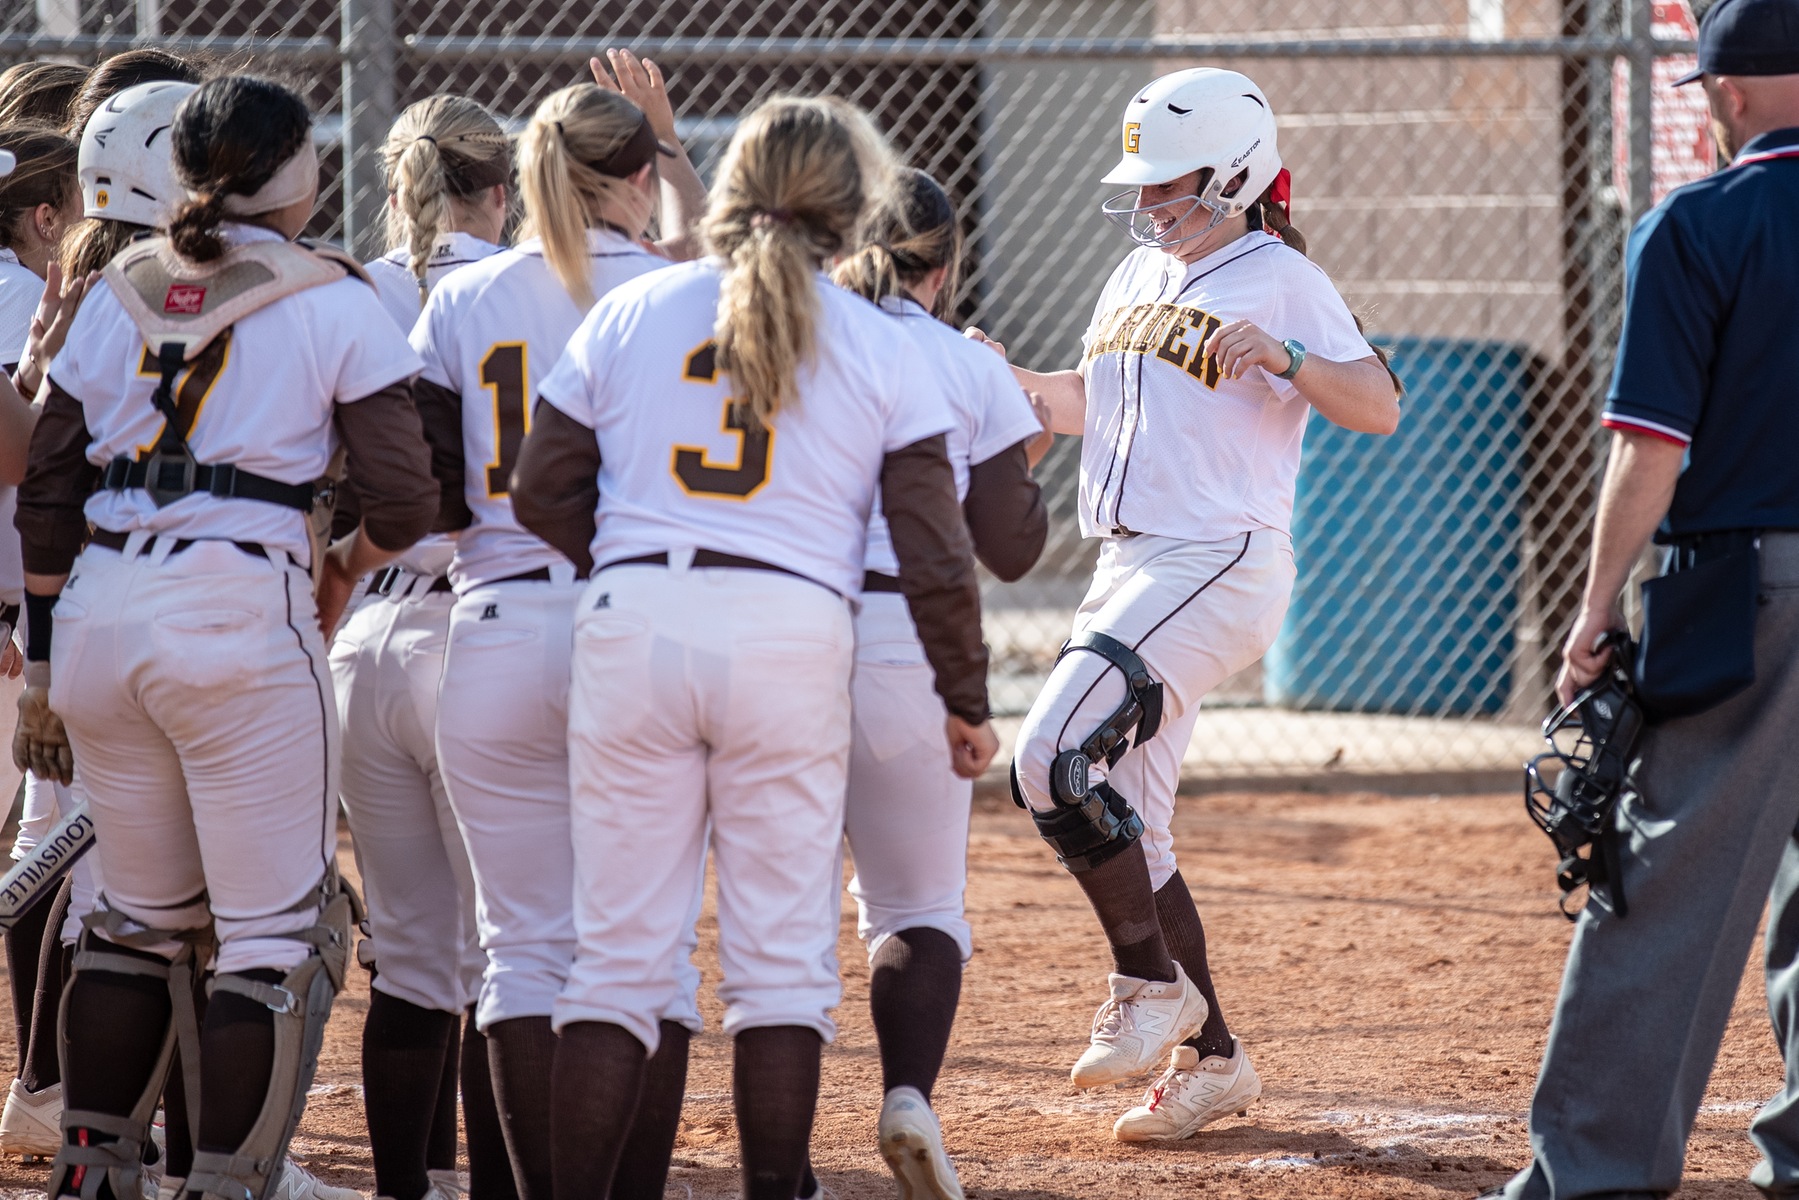 Biller lights up Dodge City; Broncbusters roll in game two